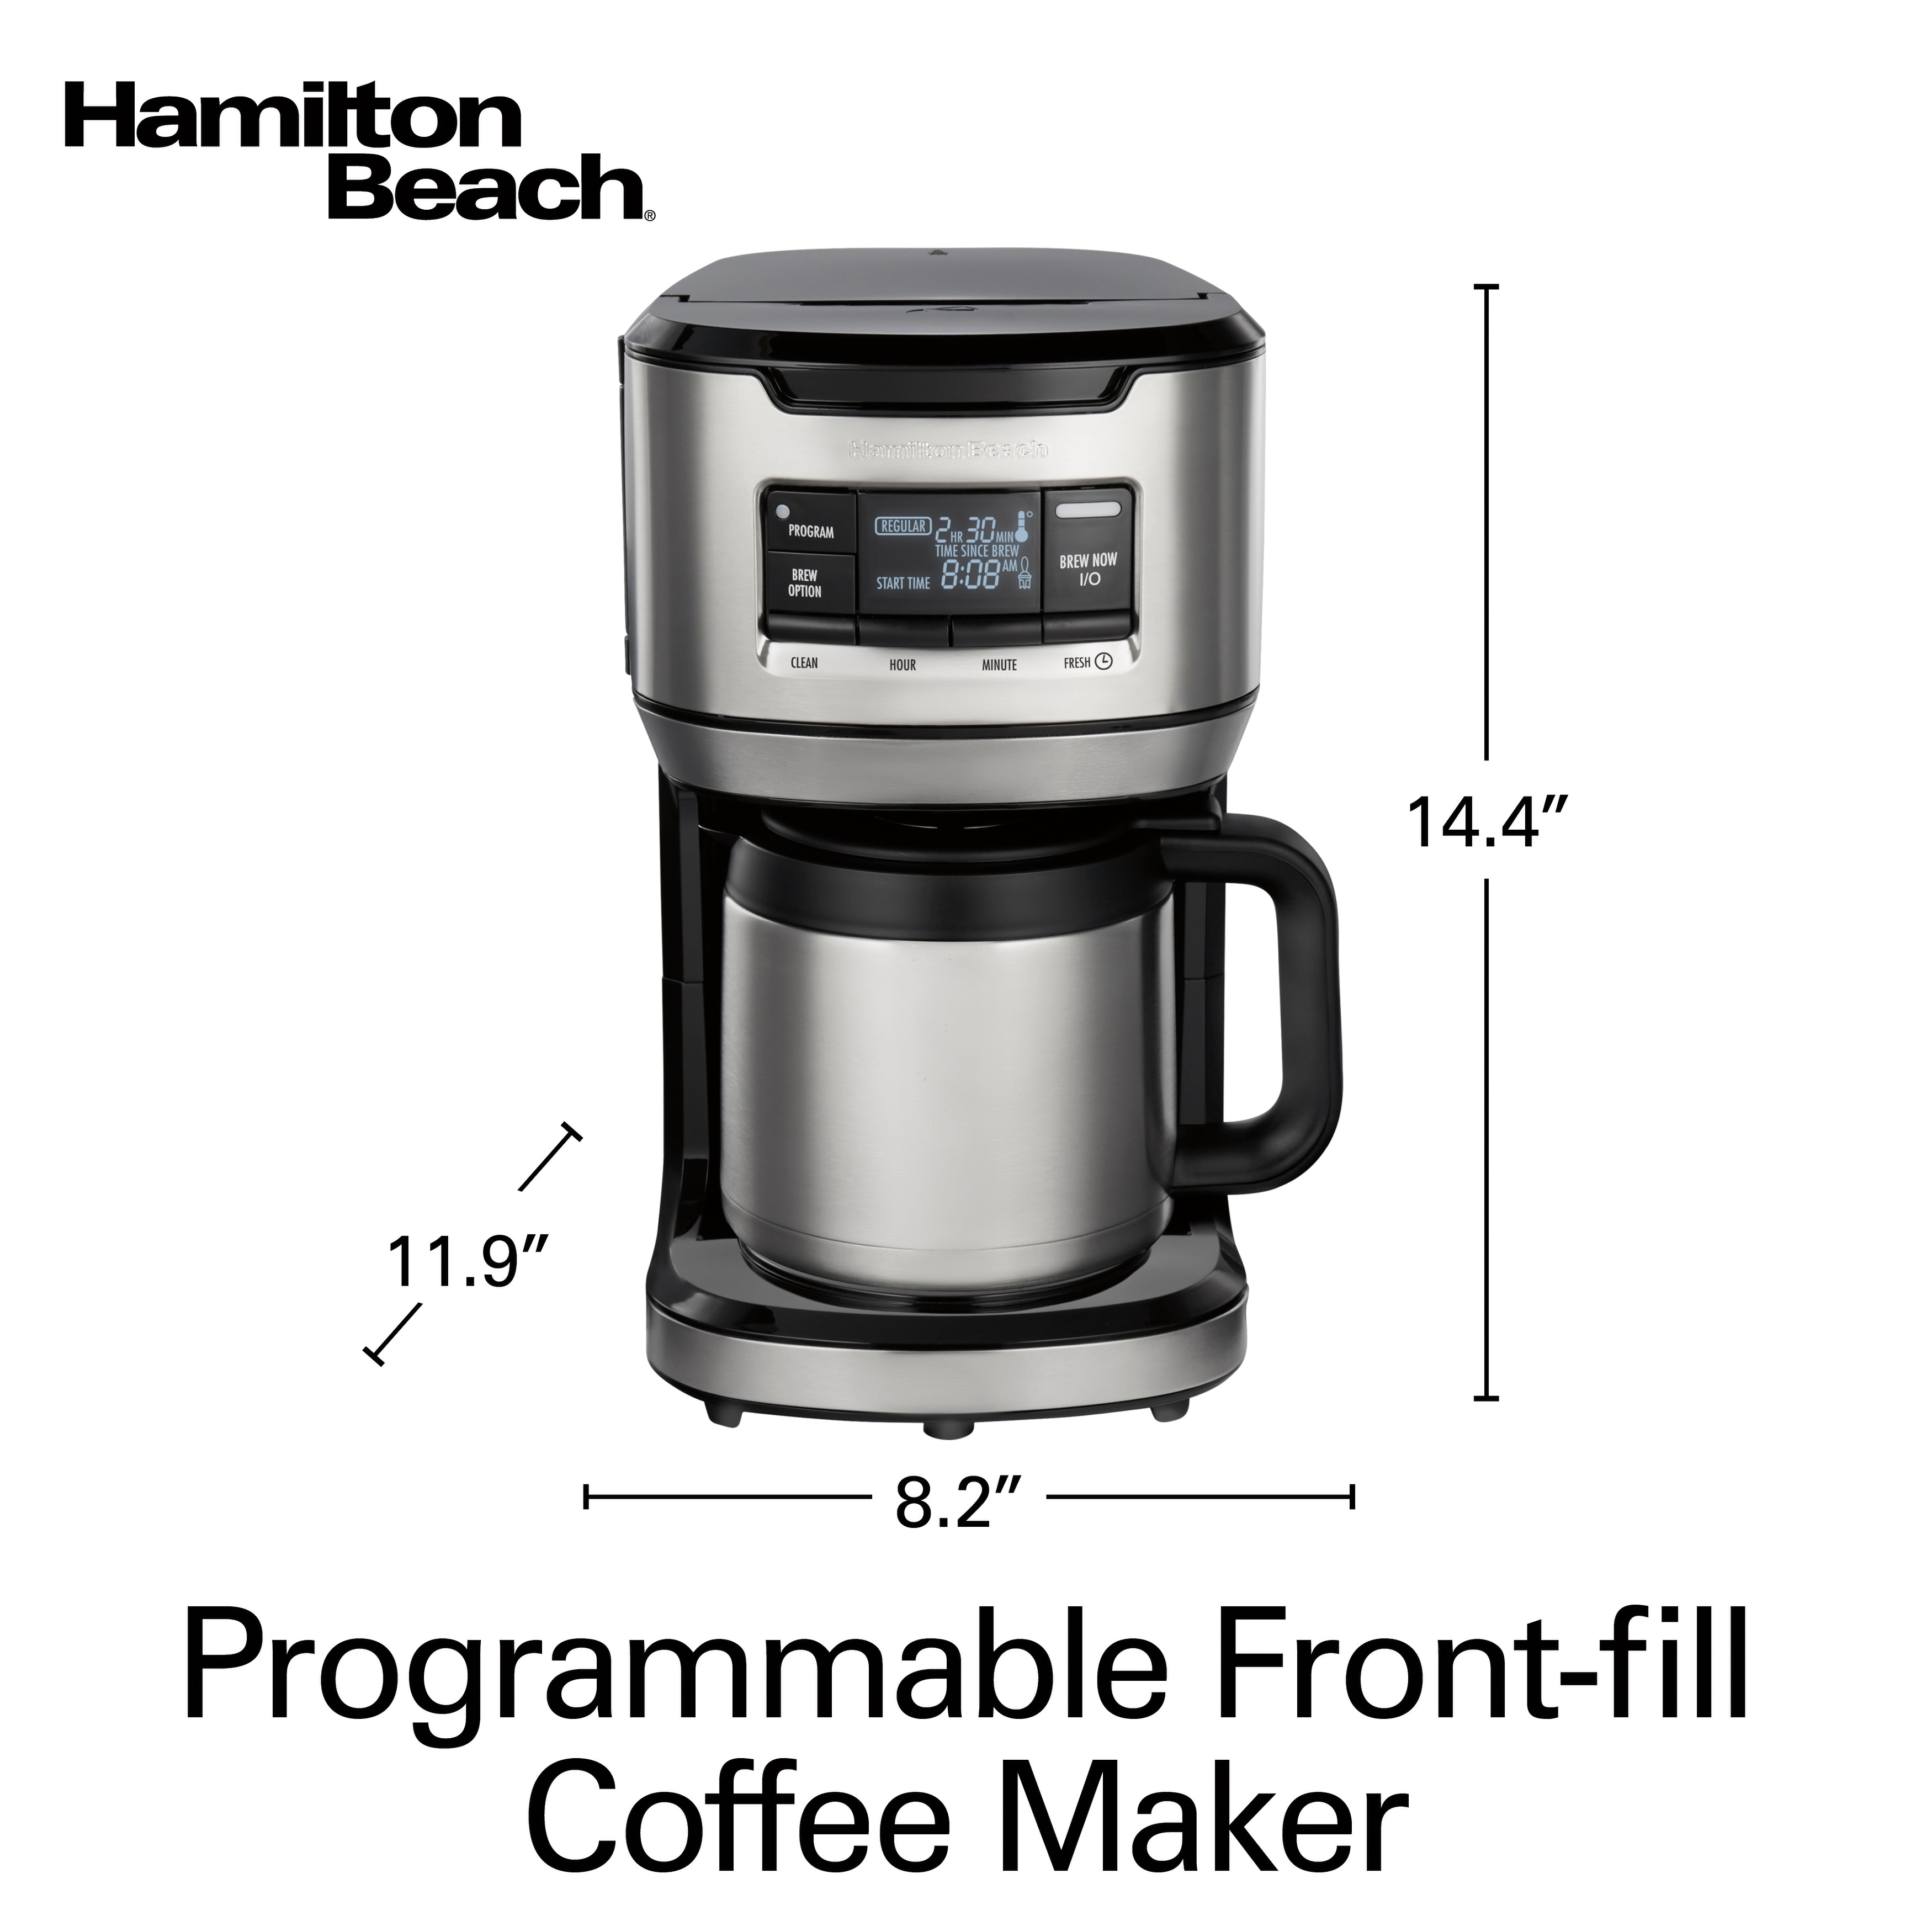 https://ak1.ostkcdn.com/images/products/30970356/Hamilton-Beach-Programmable-Front-Fill-12-Cup-Coffee-Maker-with-Thermal-Carafe-6b9bb5f1-51d1-474a-a49c-a17af10f0e29.jpg